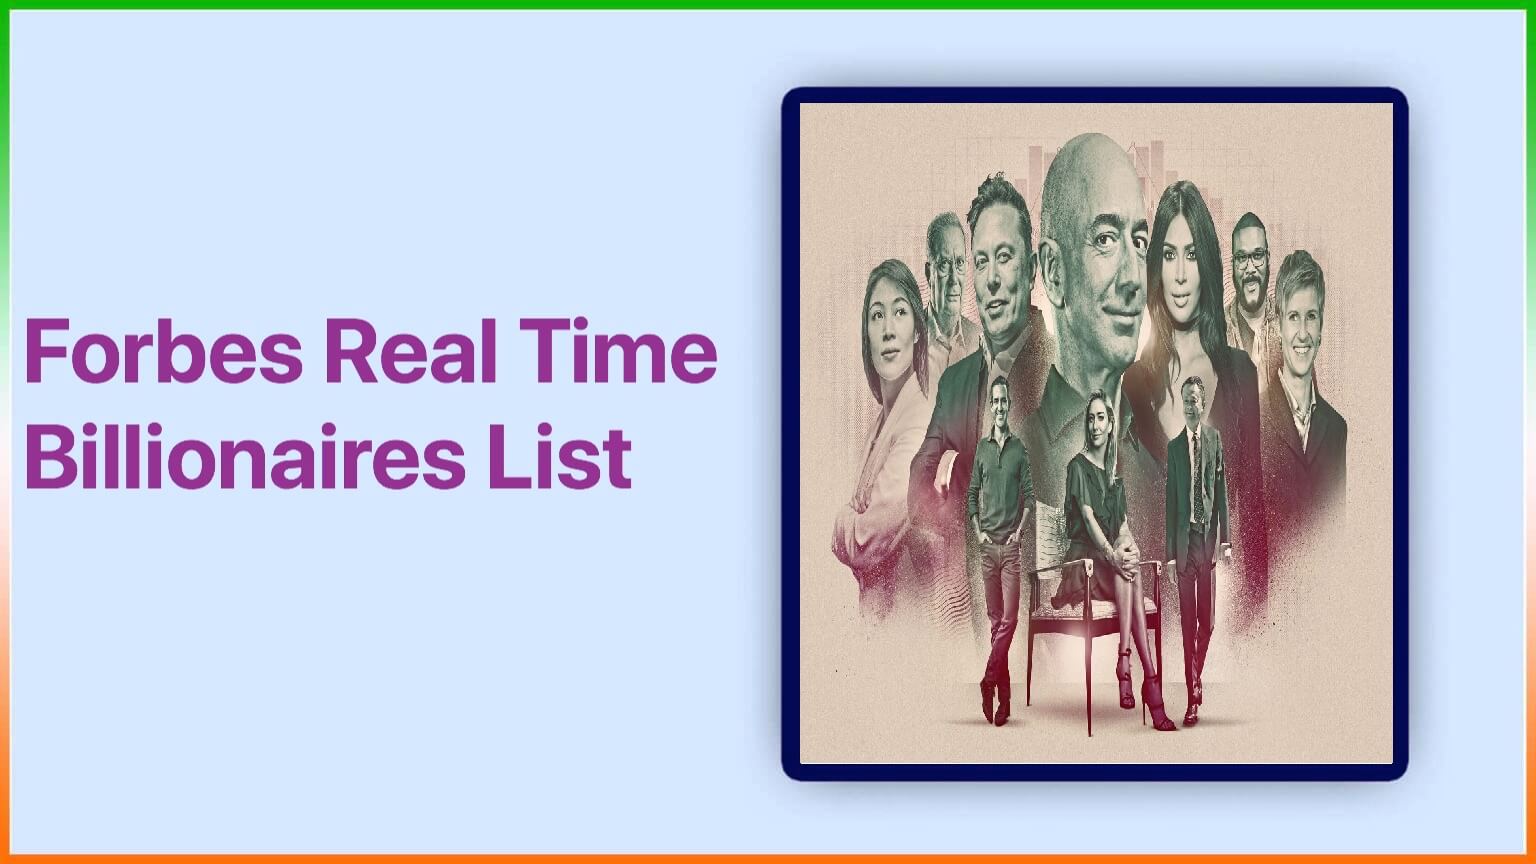 Forbes Real Time Billionaires List